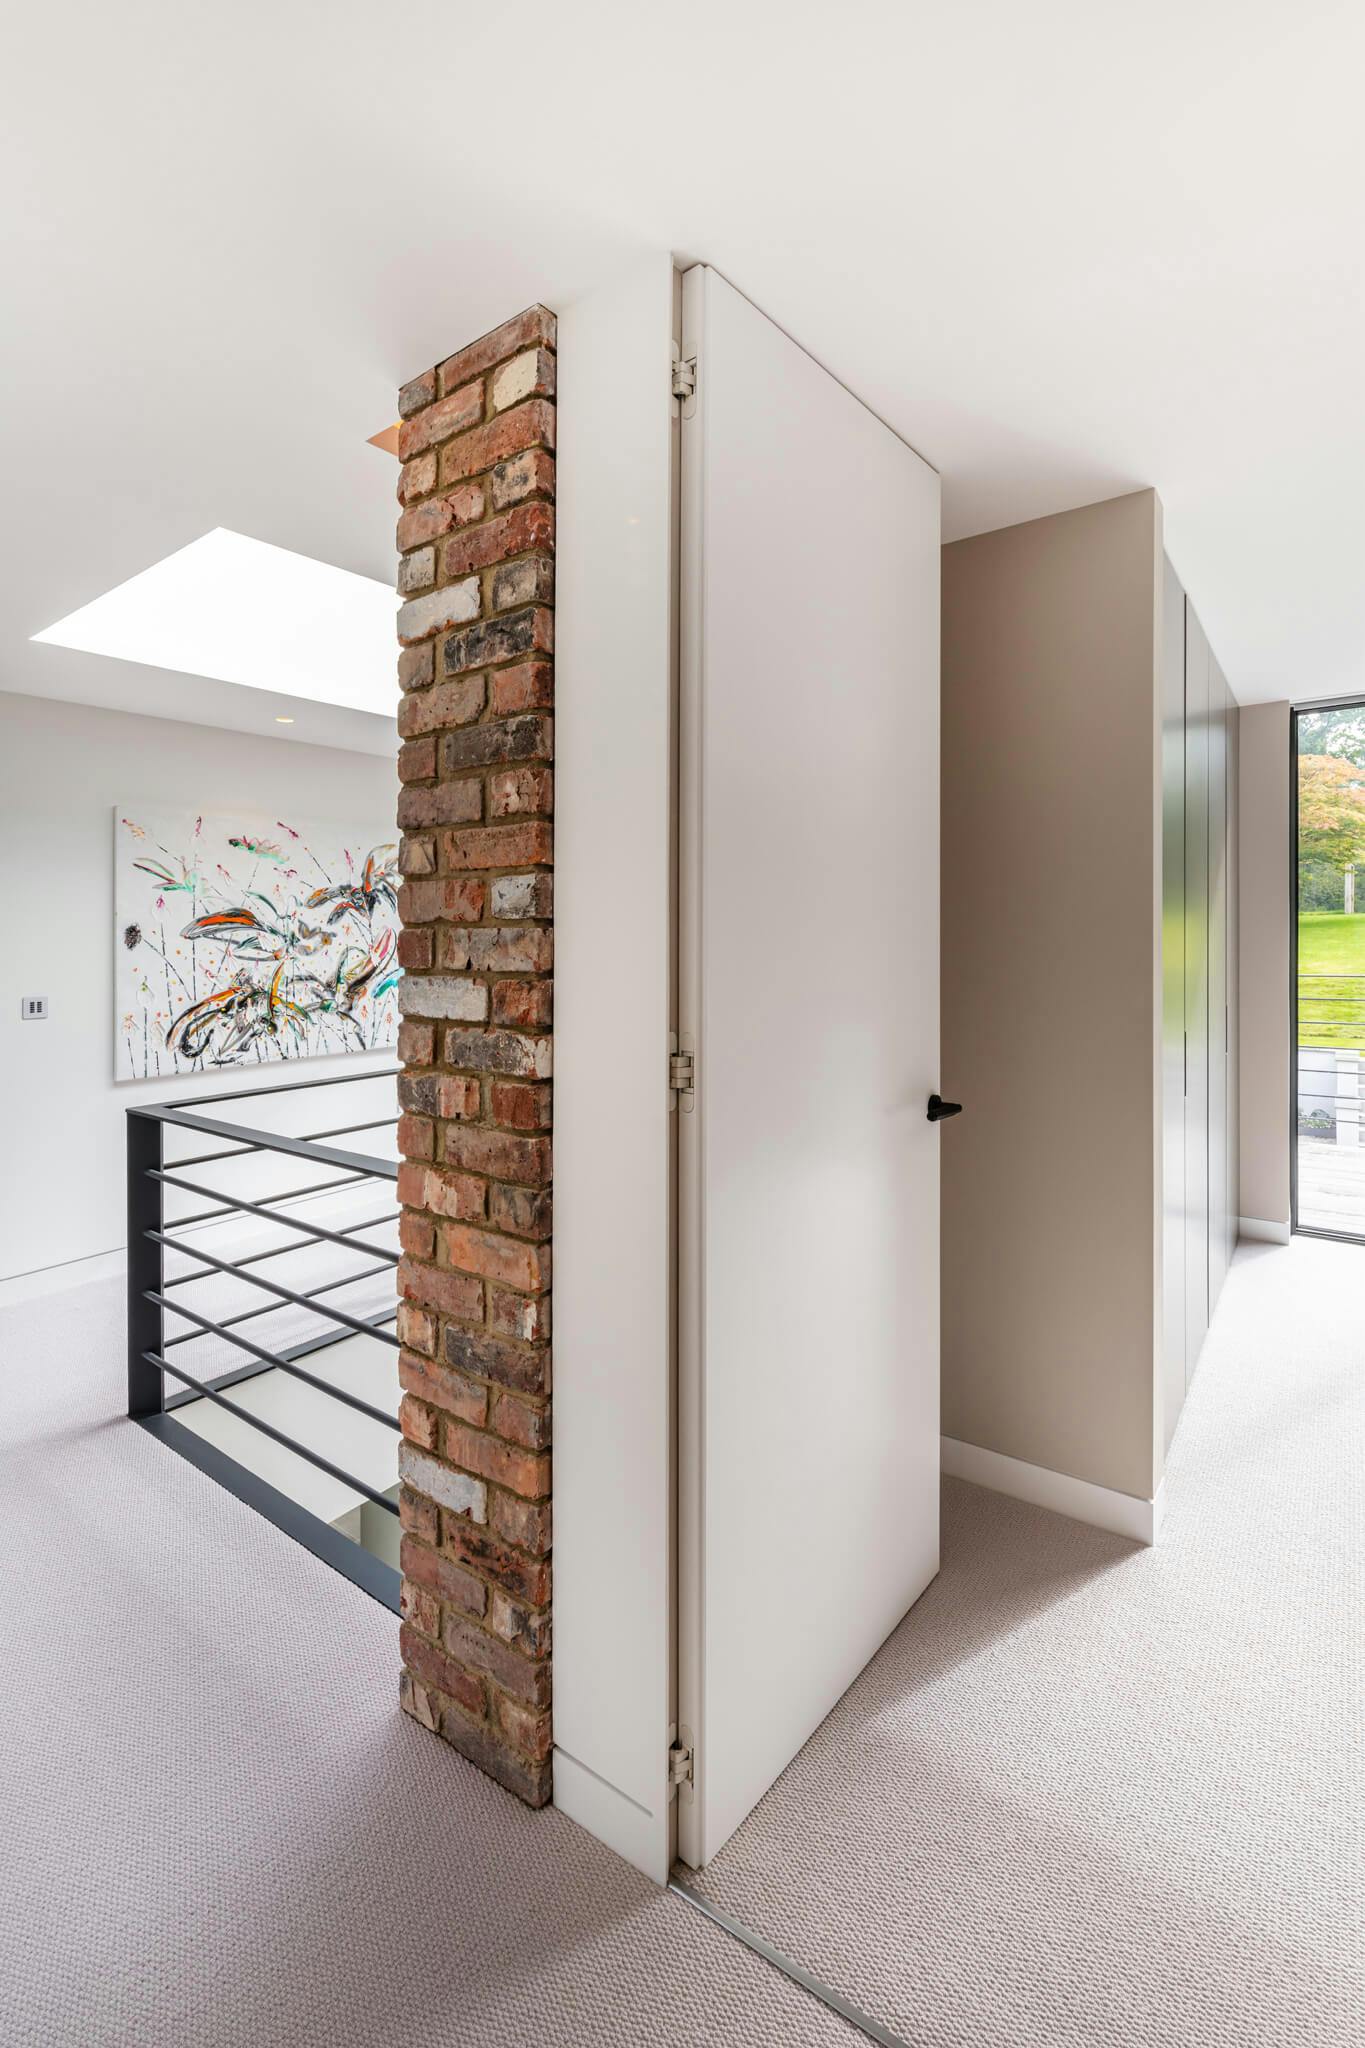 A carpeted upstairs landing with rooflight, brick wall feature and white fully open flush door leading into a bedroom.